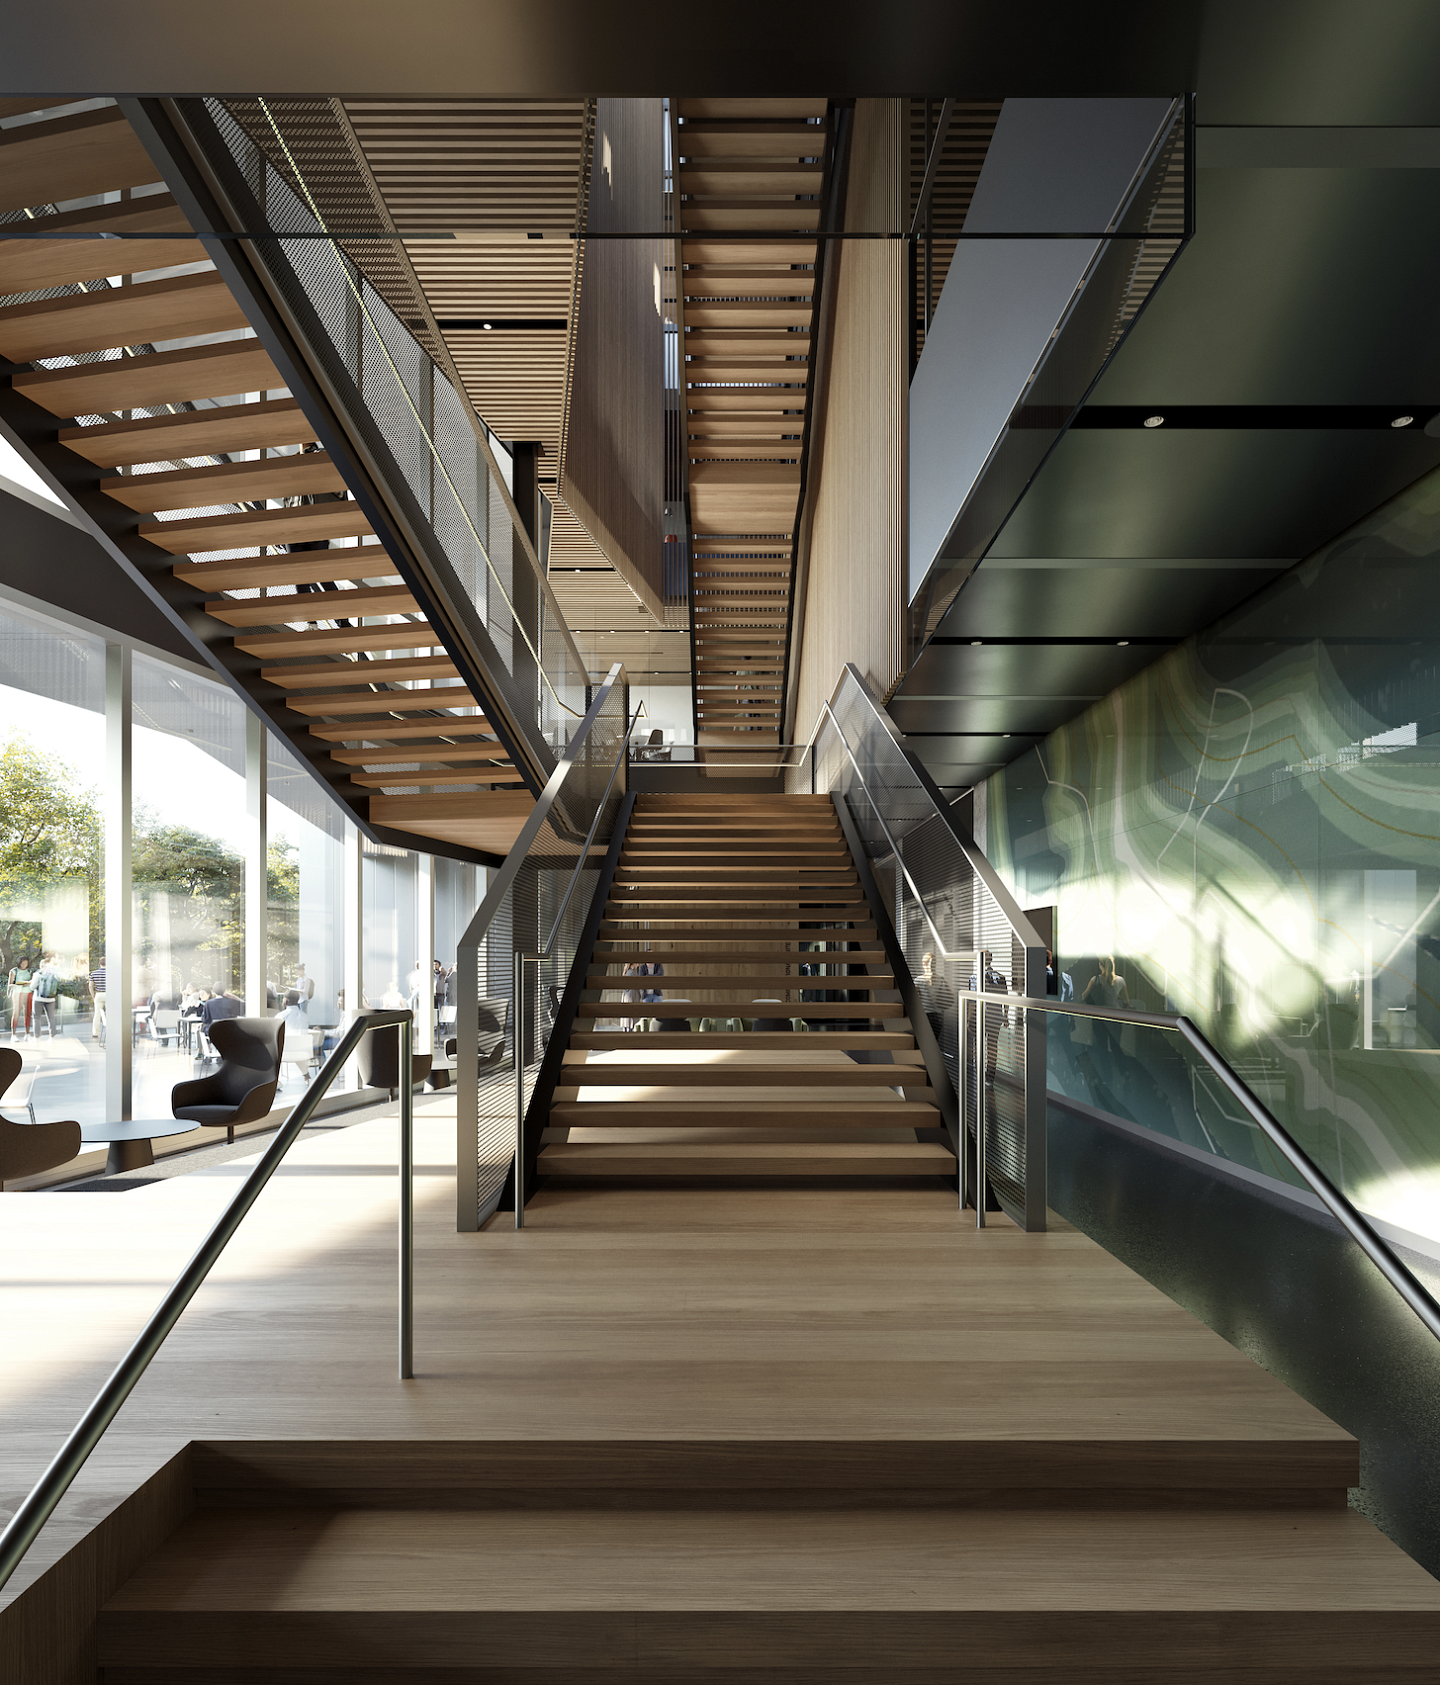 Artist rendering by Mir of a staircase in a modern building